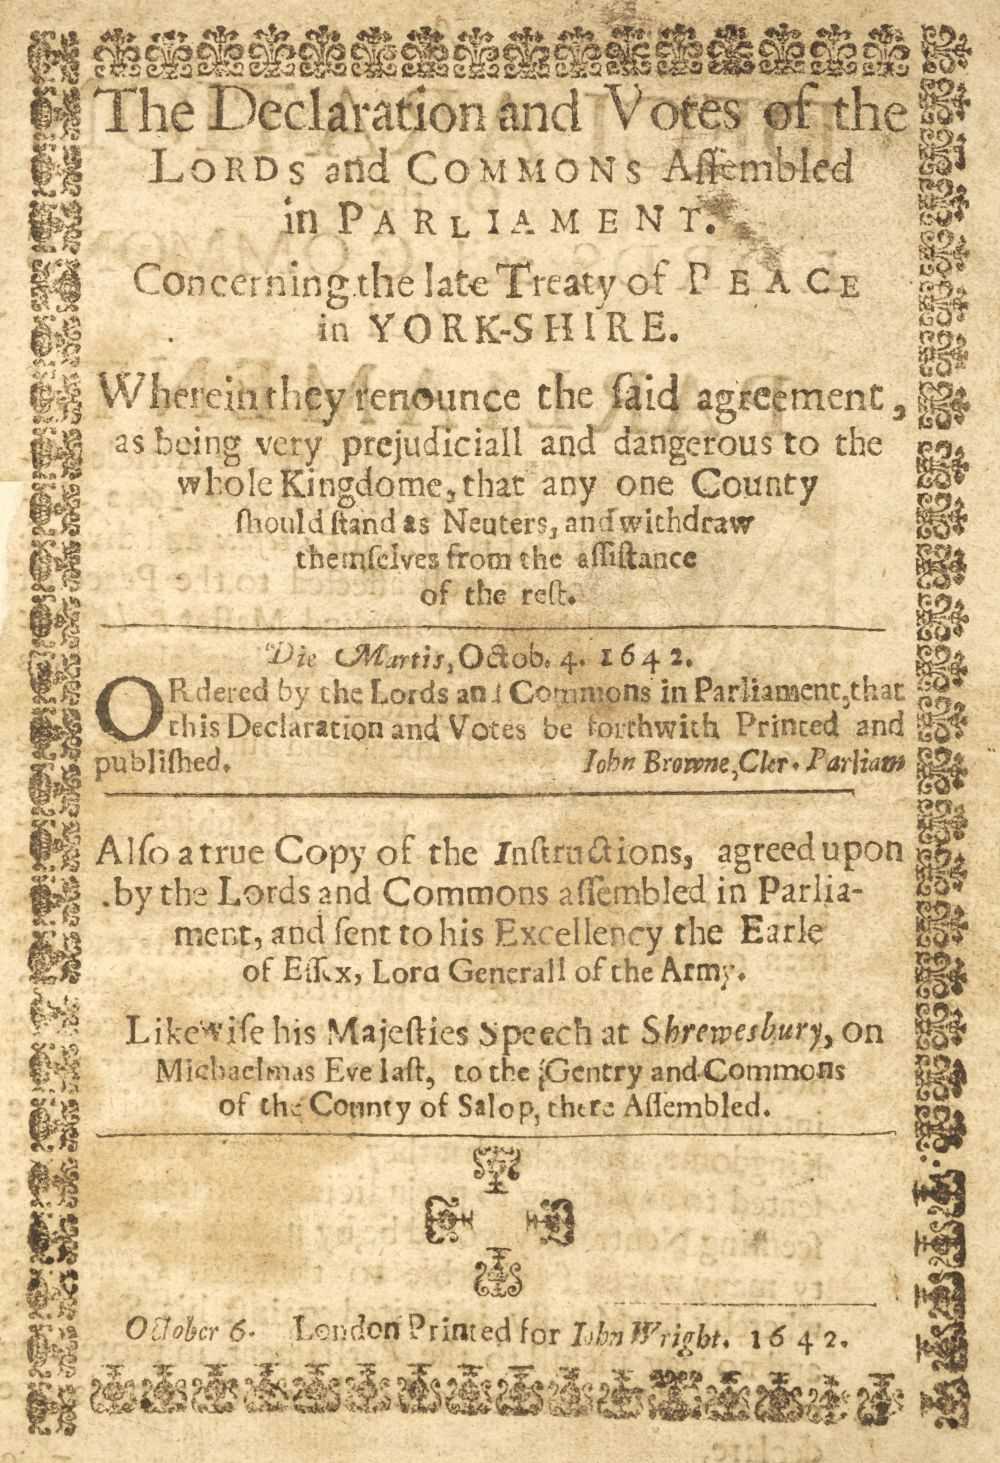 Lot 115 - English Civil War. The Declaration and Votes of the Lords and Commons assembled in Parliament. 1642